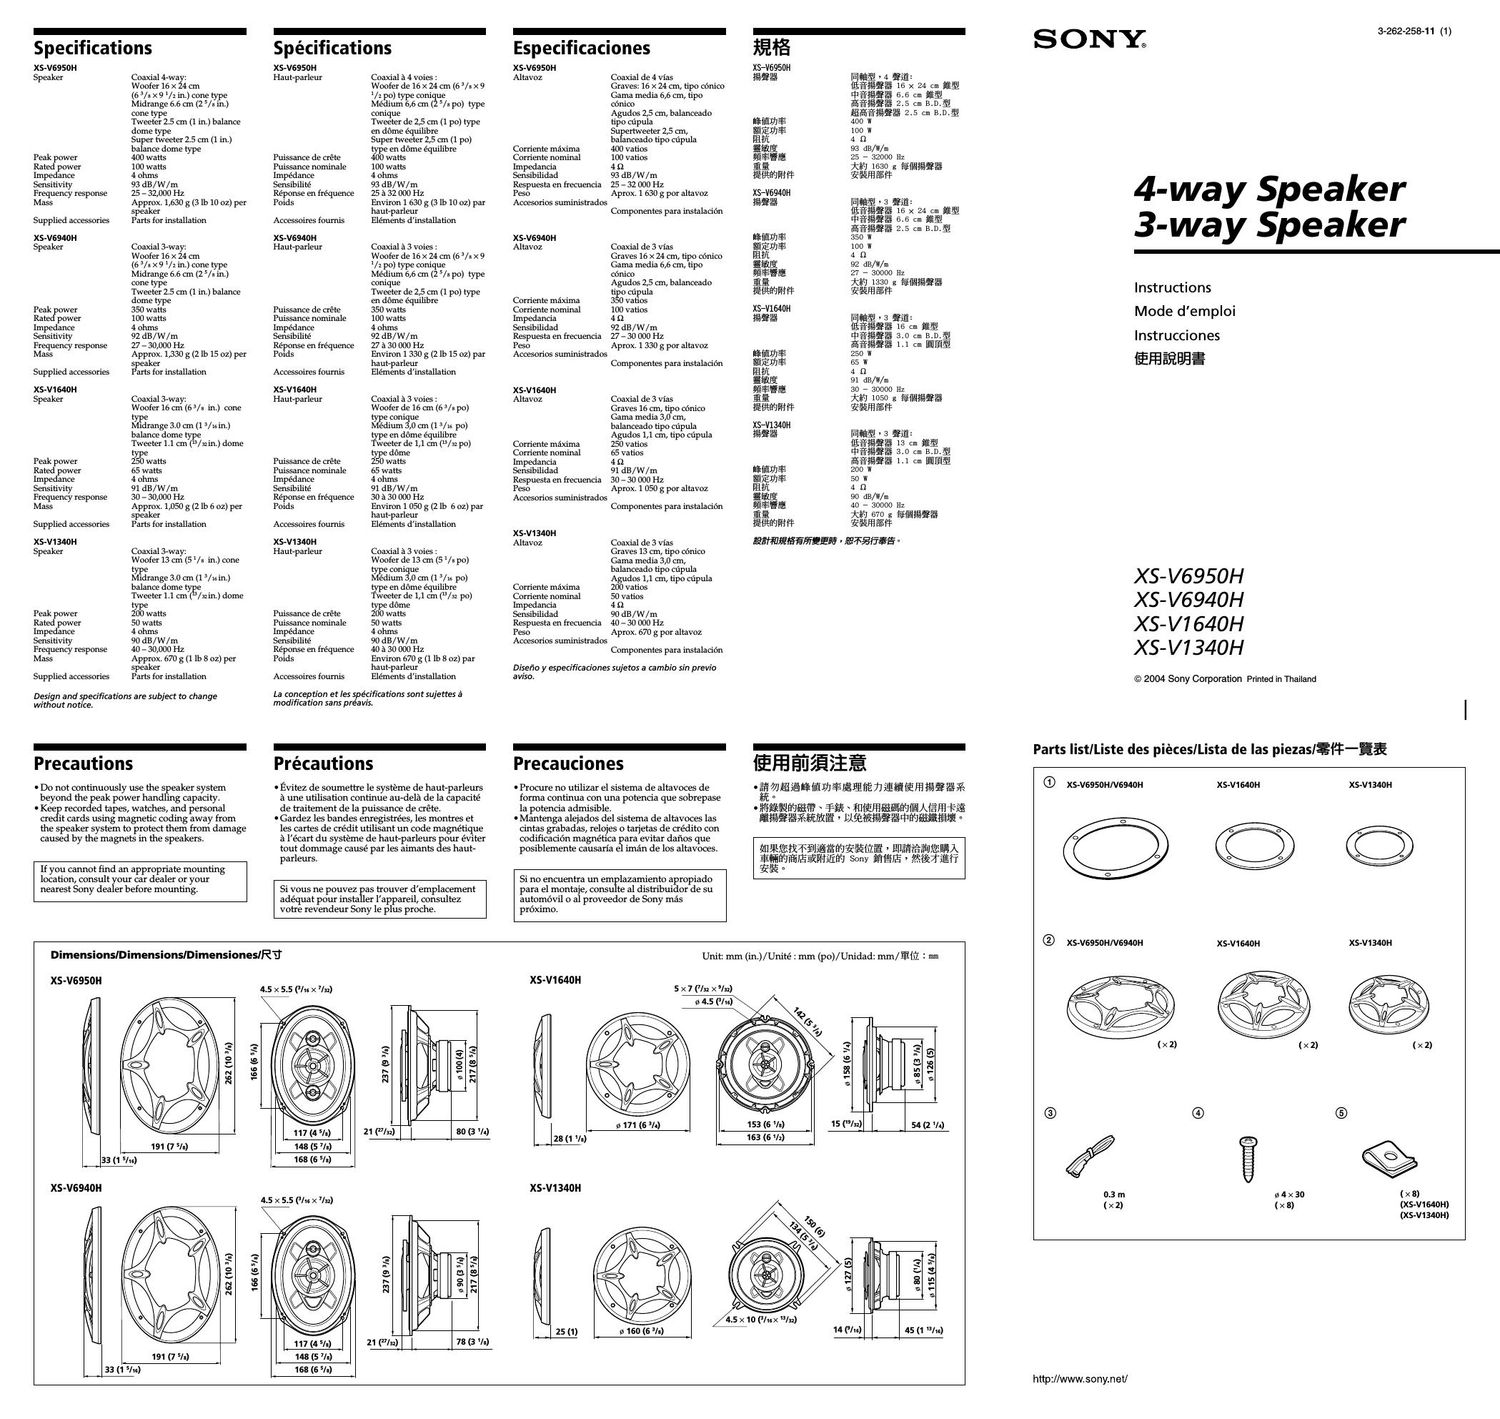 sony xs v 1340 h owners manual